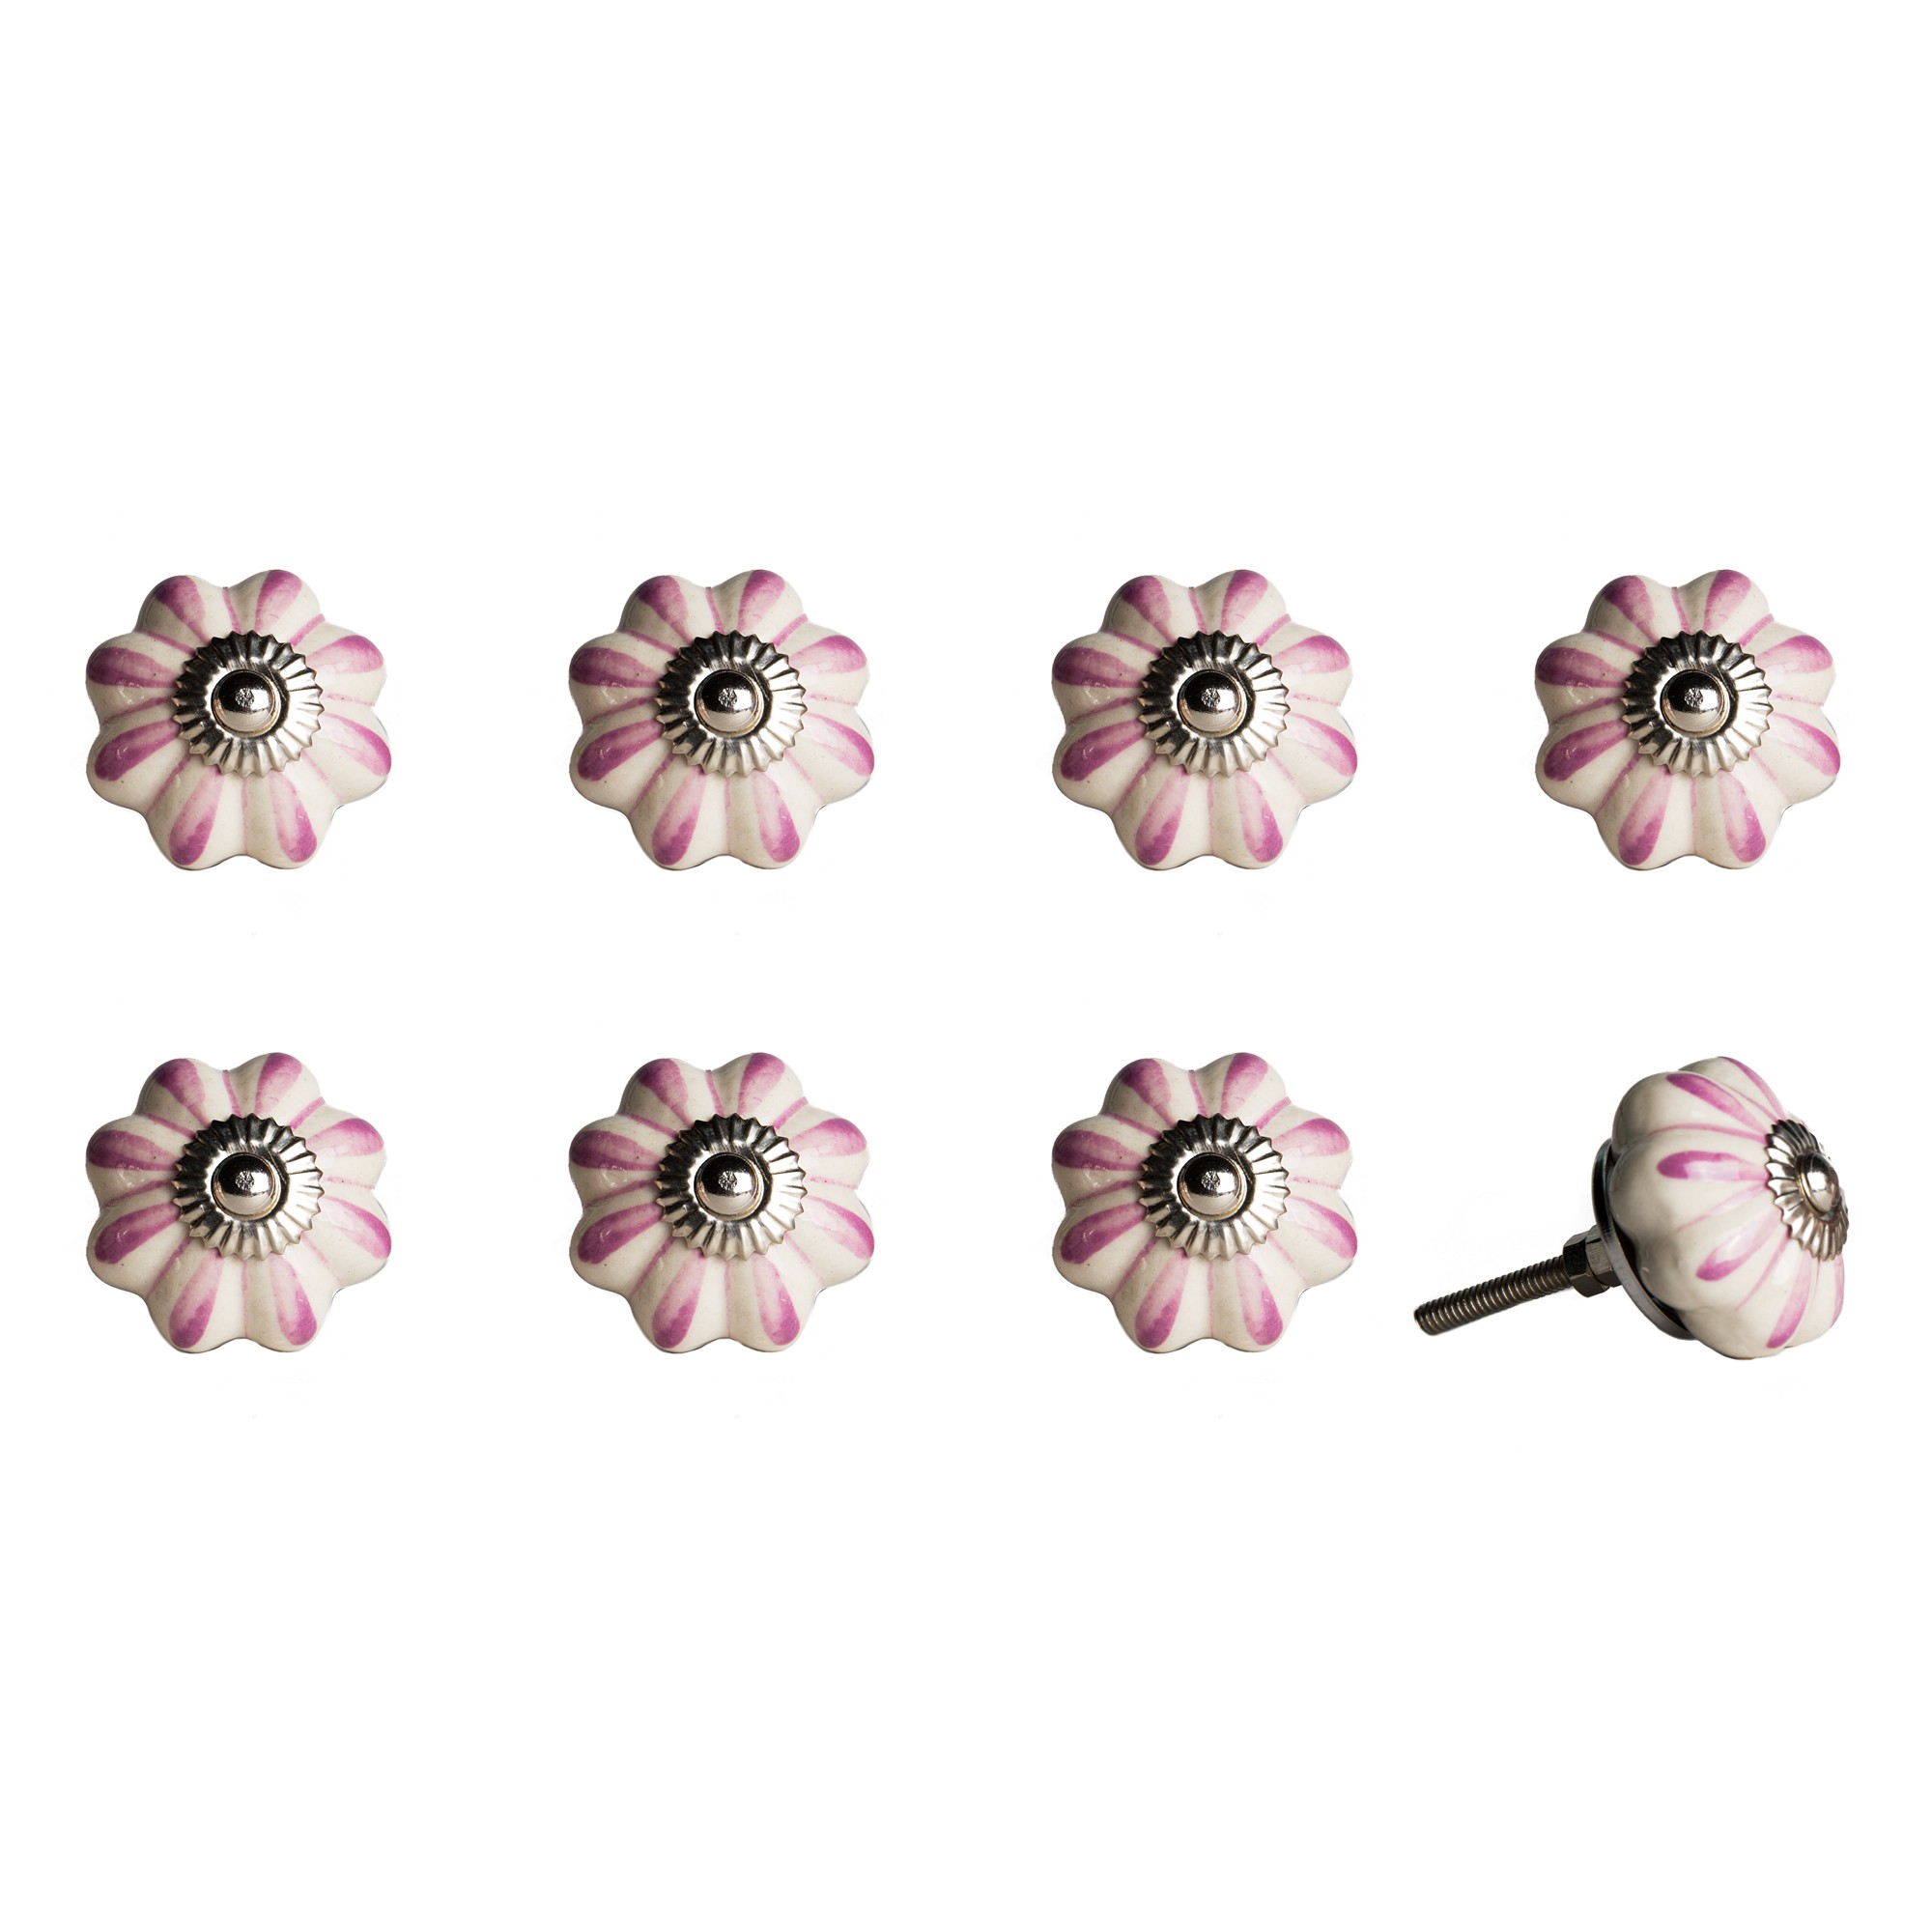 1.5" x 1.5" x 1.5" Hues Of Cream, Pink And Silver - Knobs 8-Pack